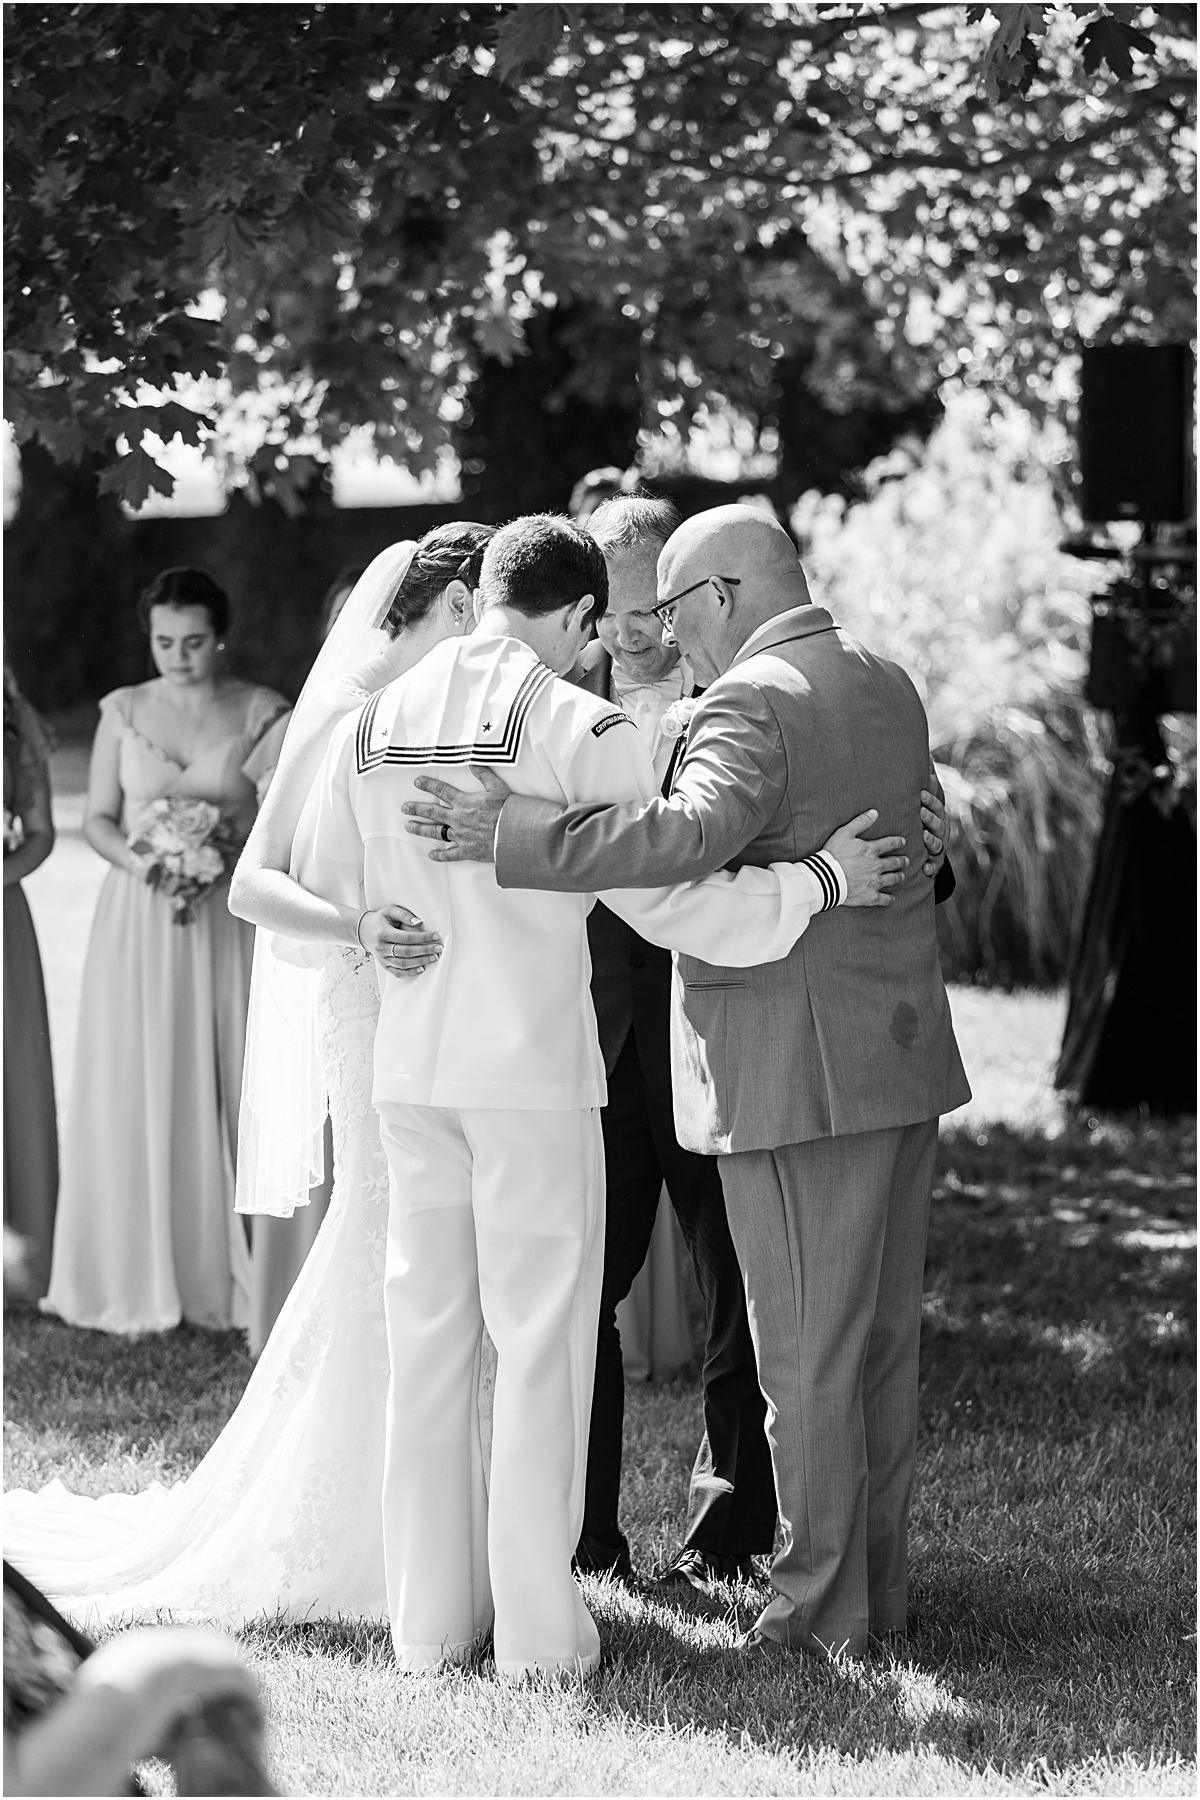 Black and white photo of the bride, groom, and their fathers praying during the ceremony. Wedding photography in Maryland done by Ashley.